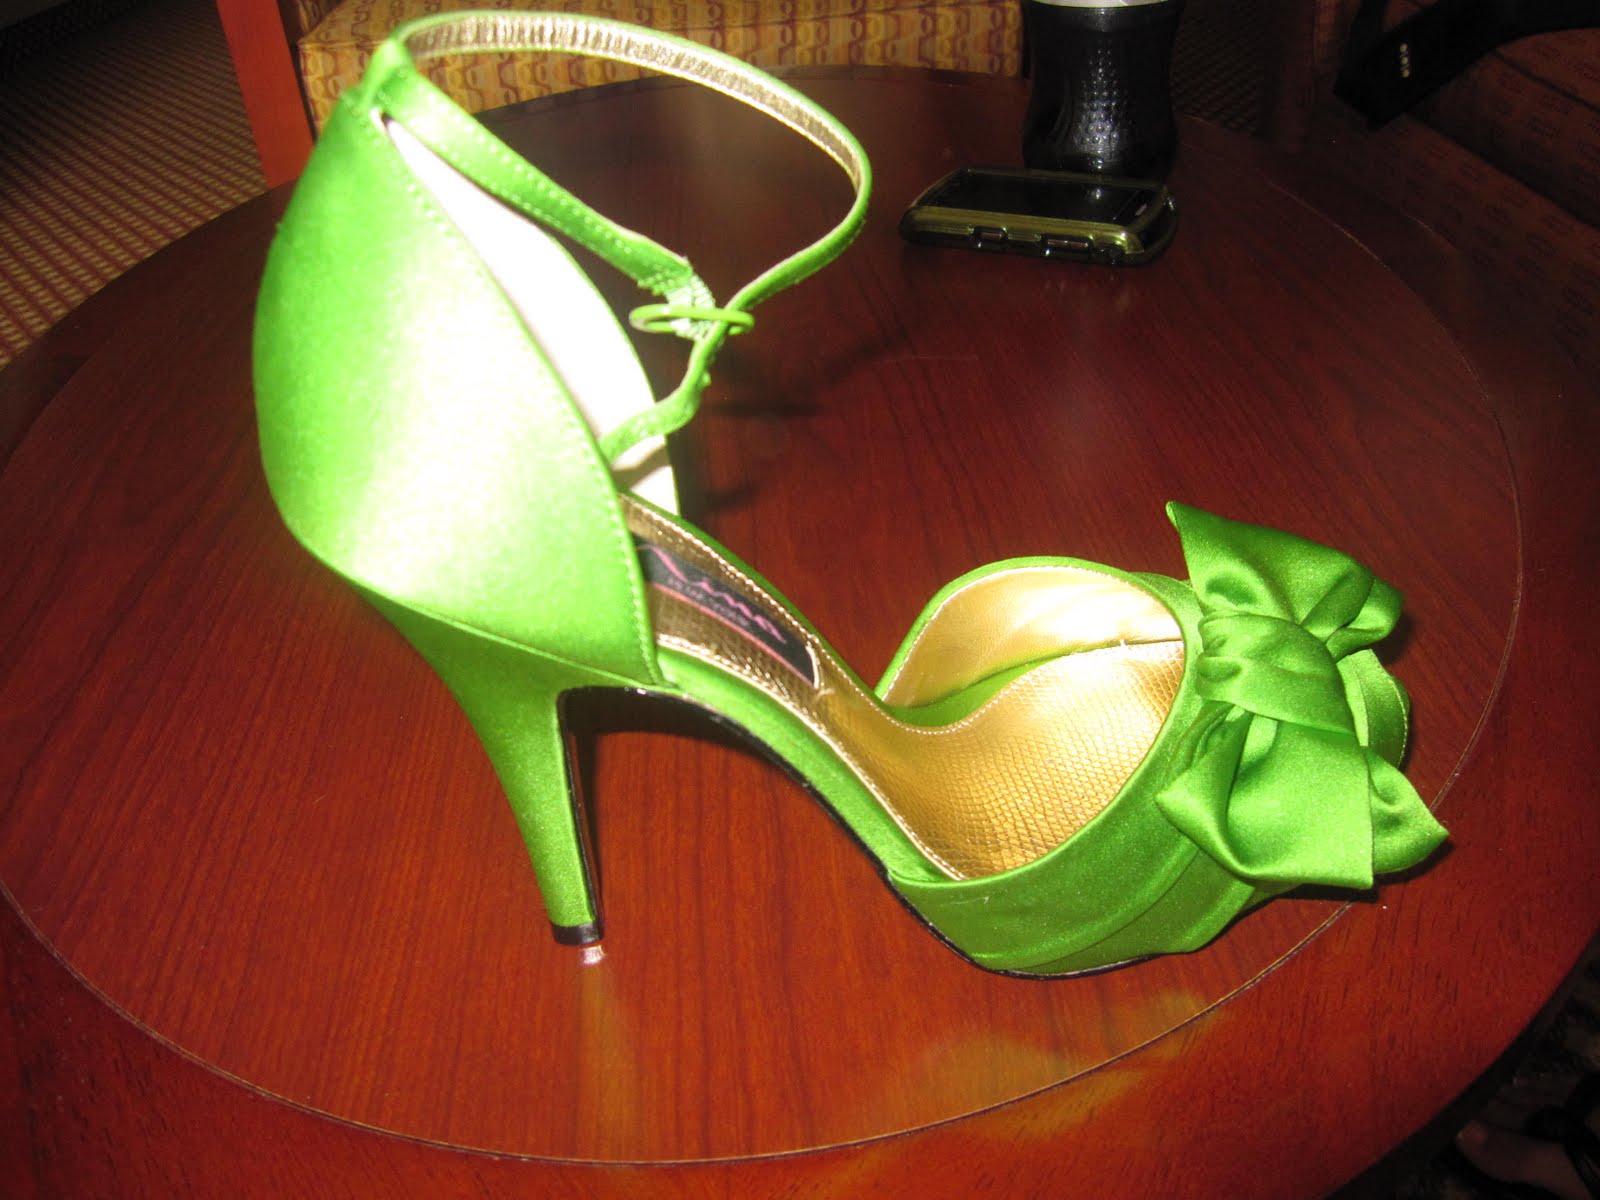 LOVE HER GREEN SHOES!